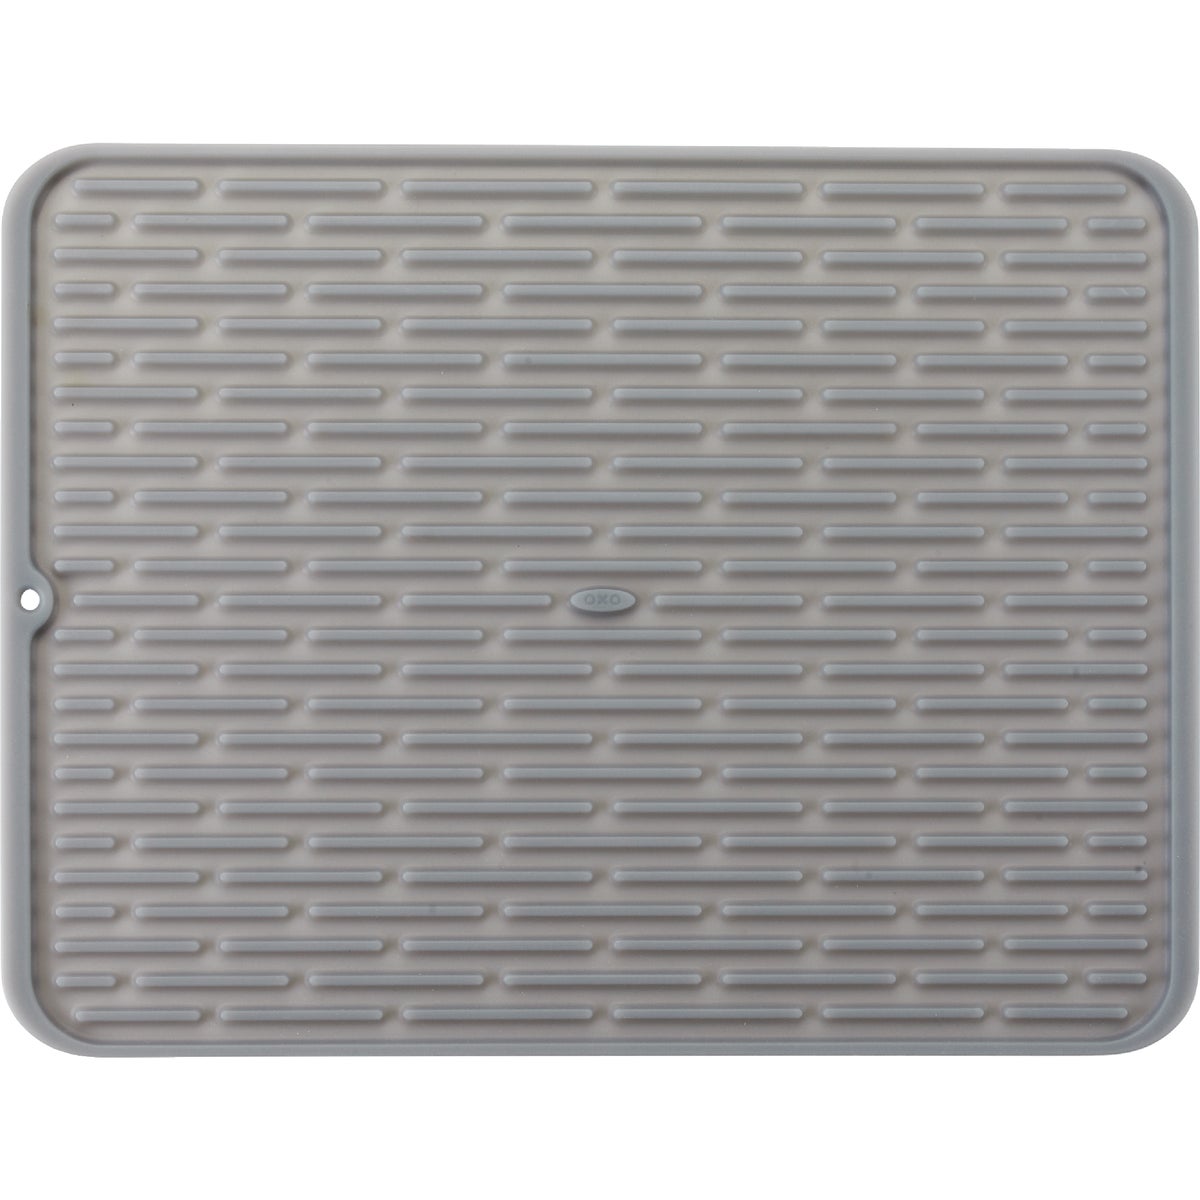 Item 625336, Our Silicone Drying Mats feature a unique rib design that aerates and 